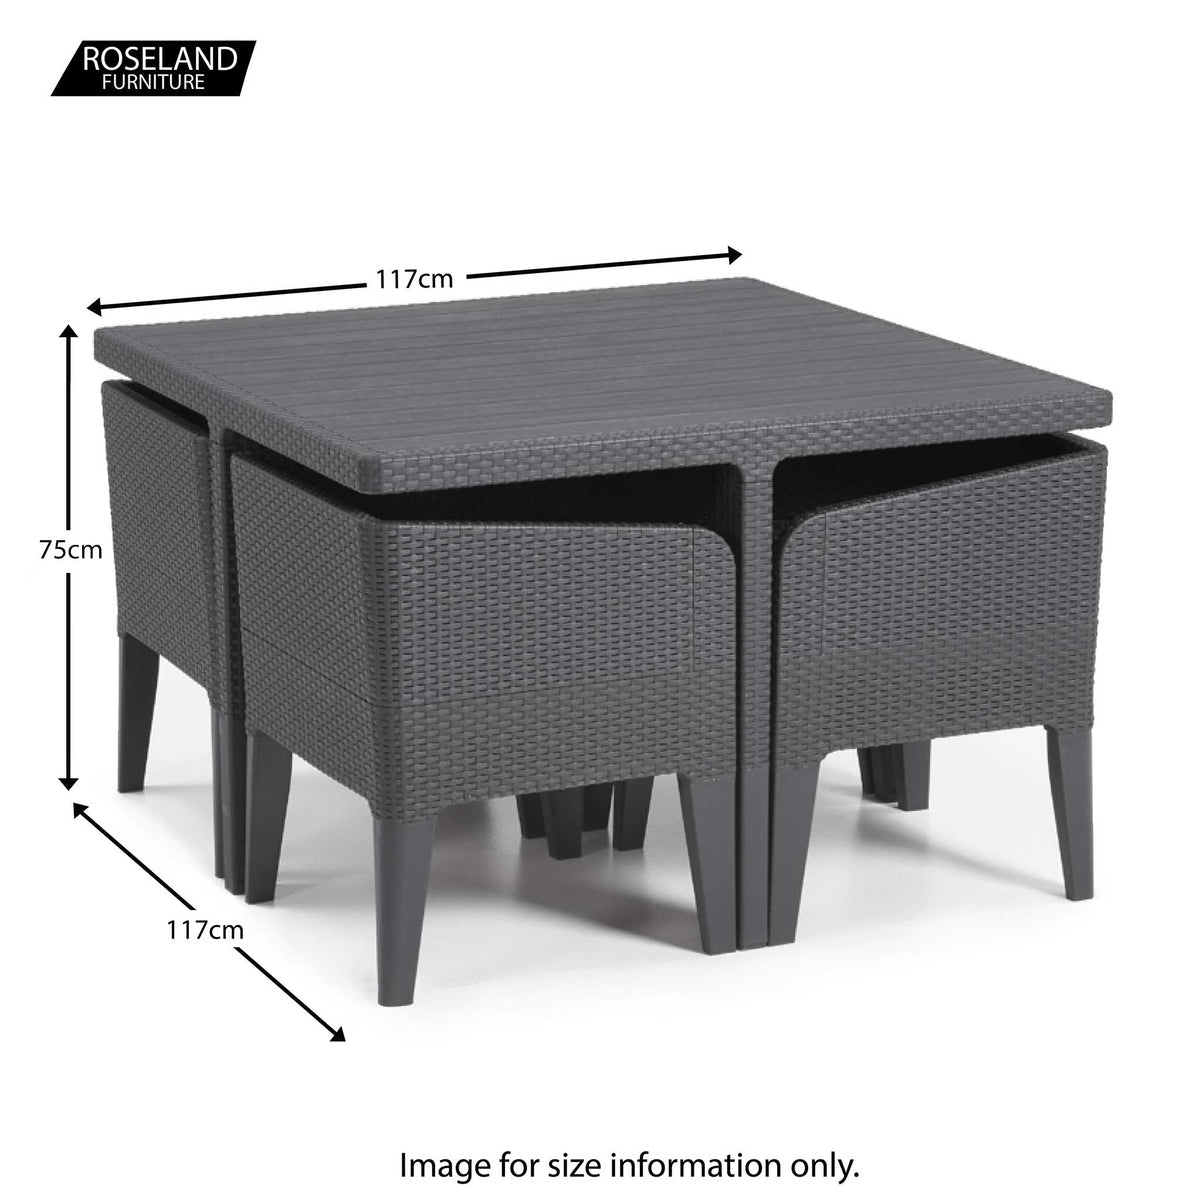 Keter Dine Out 4 Seater Dining Set - Size Guide of Table when Chairs are Nested